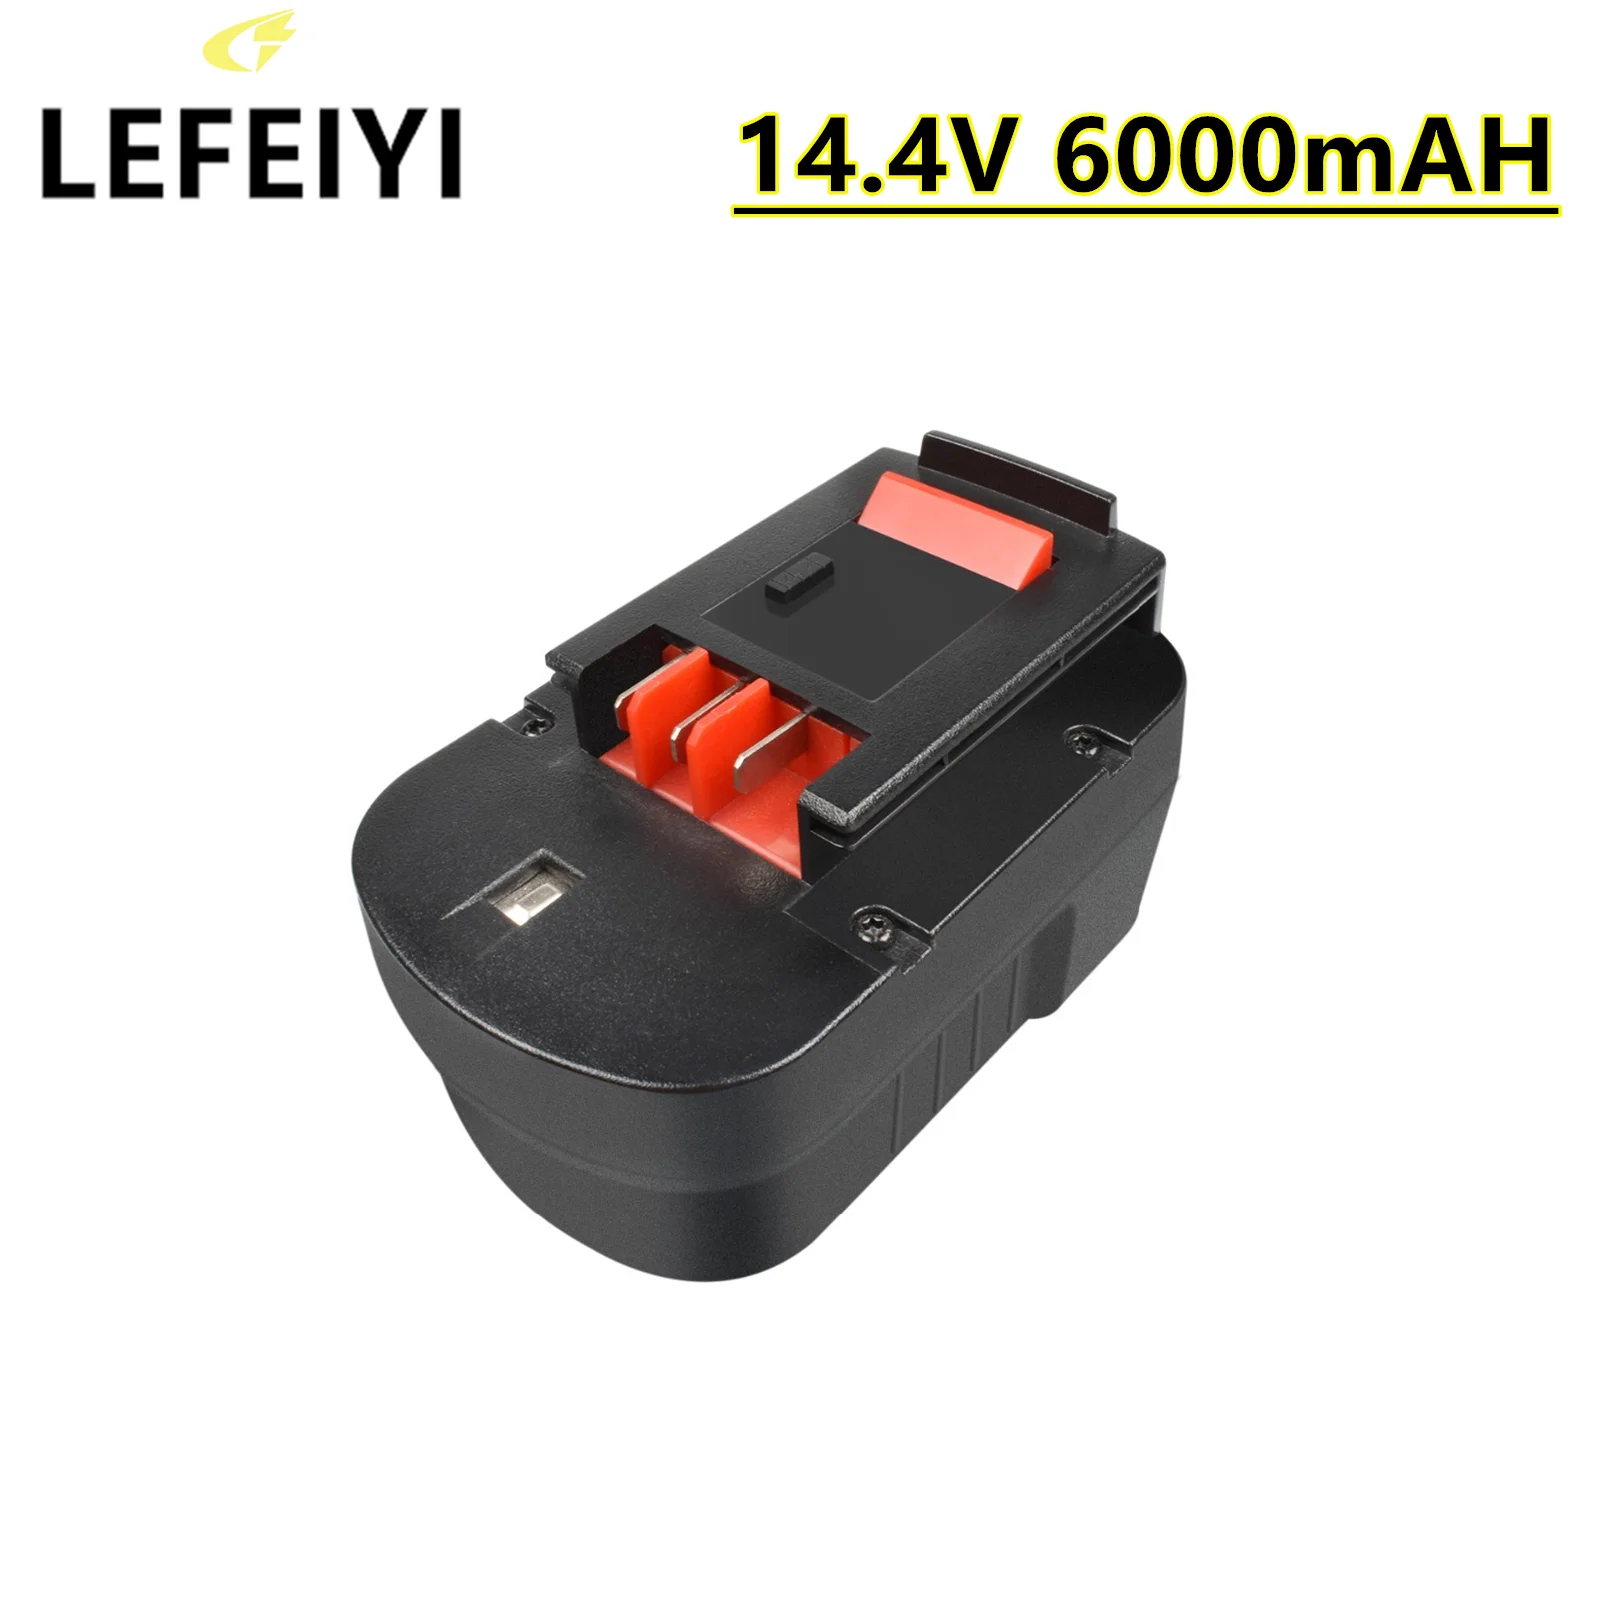 https://ae01.alicdn.com/kf/S15616ef05a4b4f7fa44d7f196c5be09fH/LEFEYI-14-4V-HPB14-Battery-for-Black-and-Decker-6000mAh-Ni-Mh-Replacement-for-Firestorm-FSB14.png